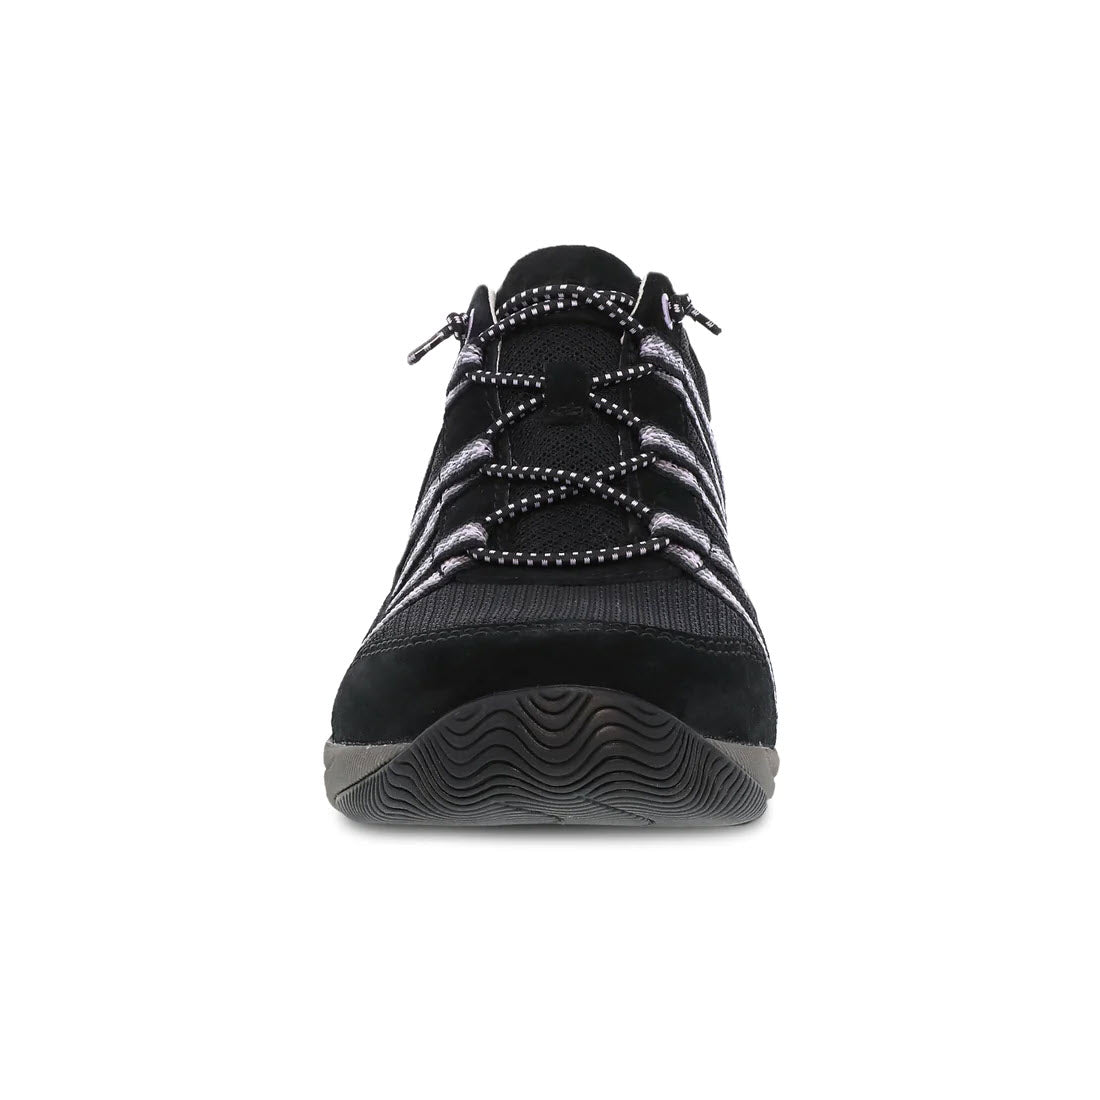 Front view of a single lightweight performance Dansko Harlyn Black sneaker with laces on a white background.